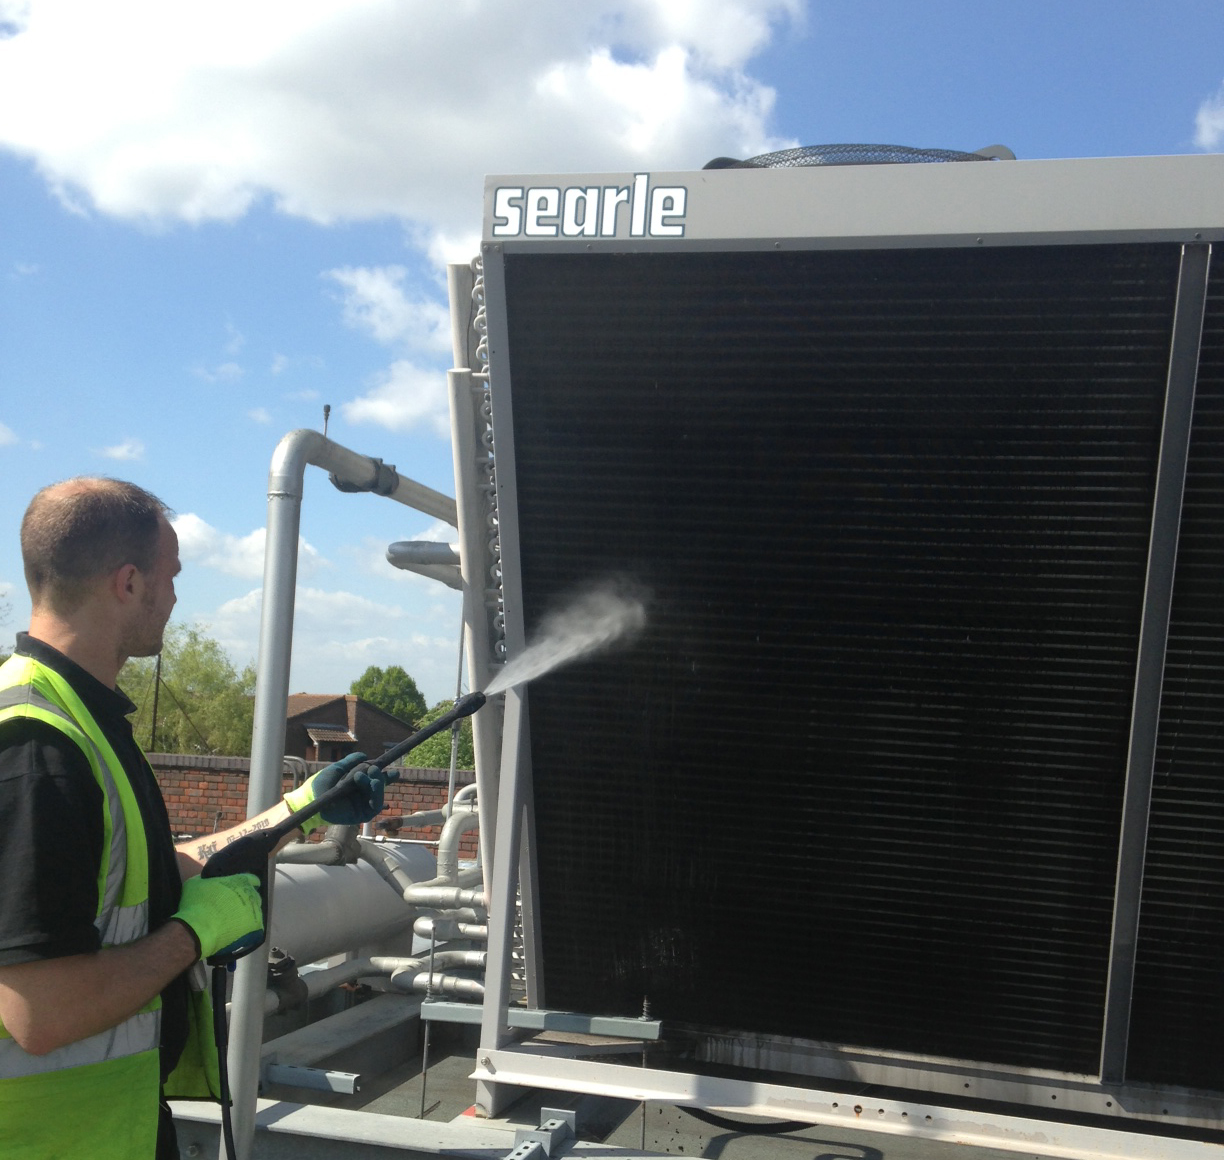 Cleaning a Searle condenser coil